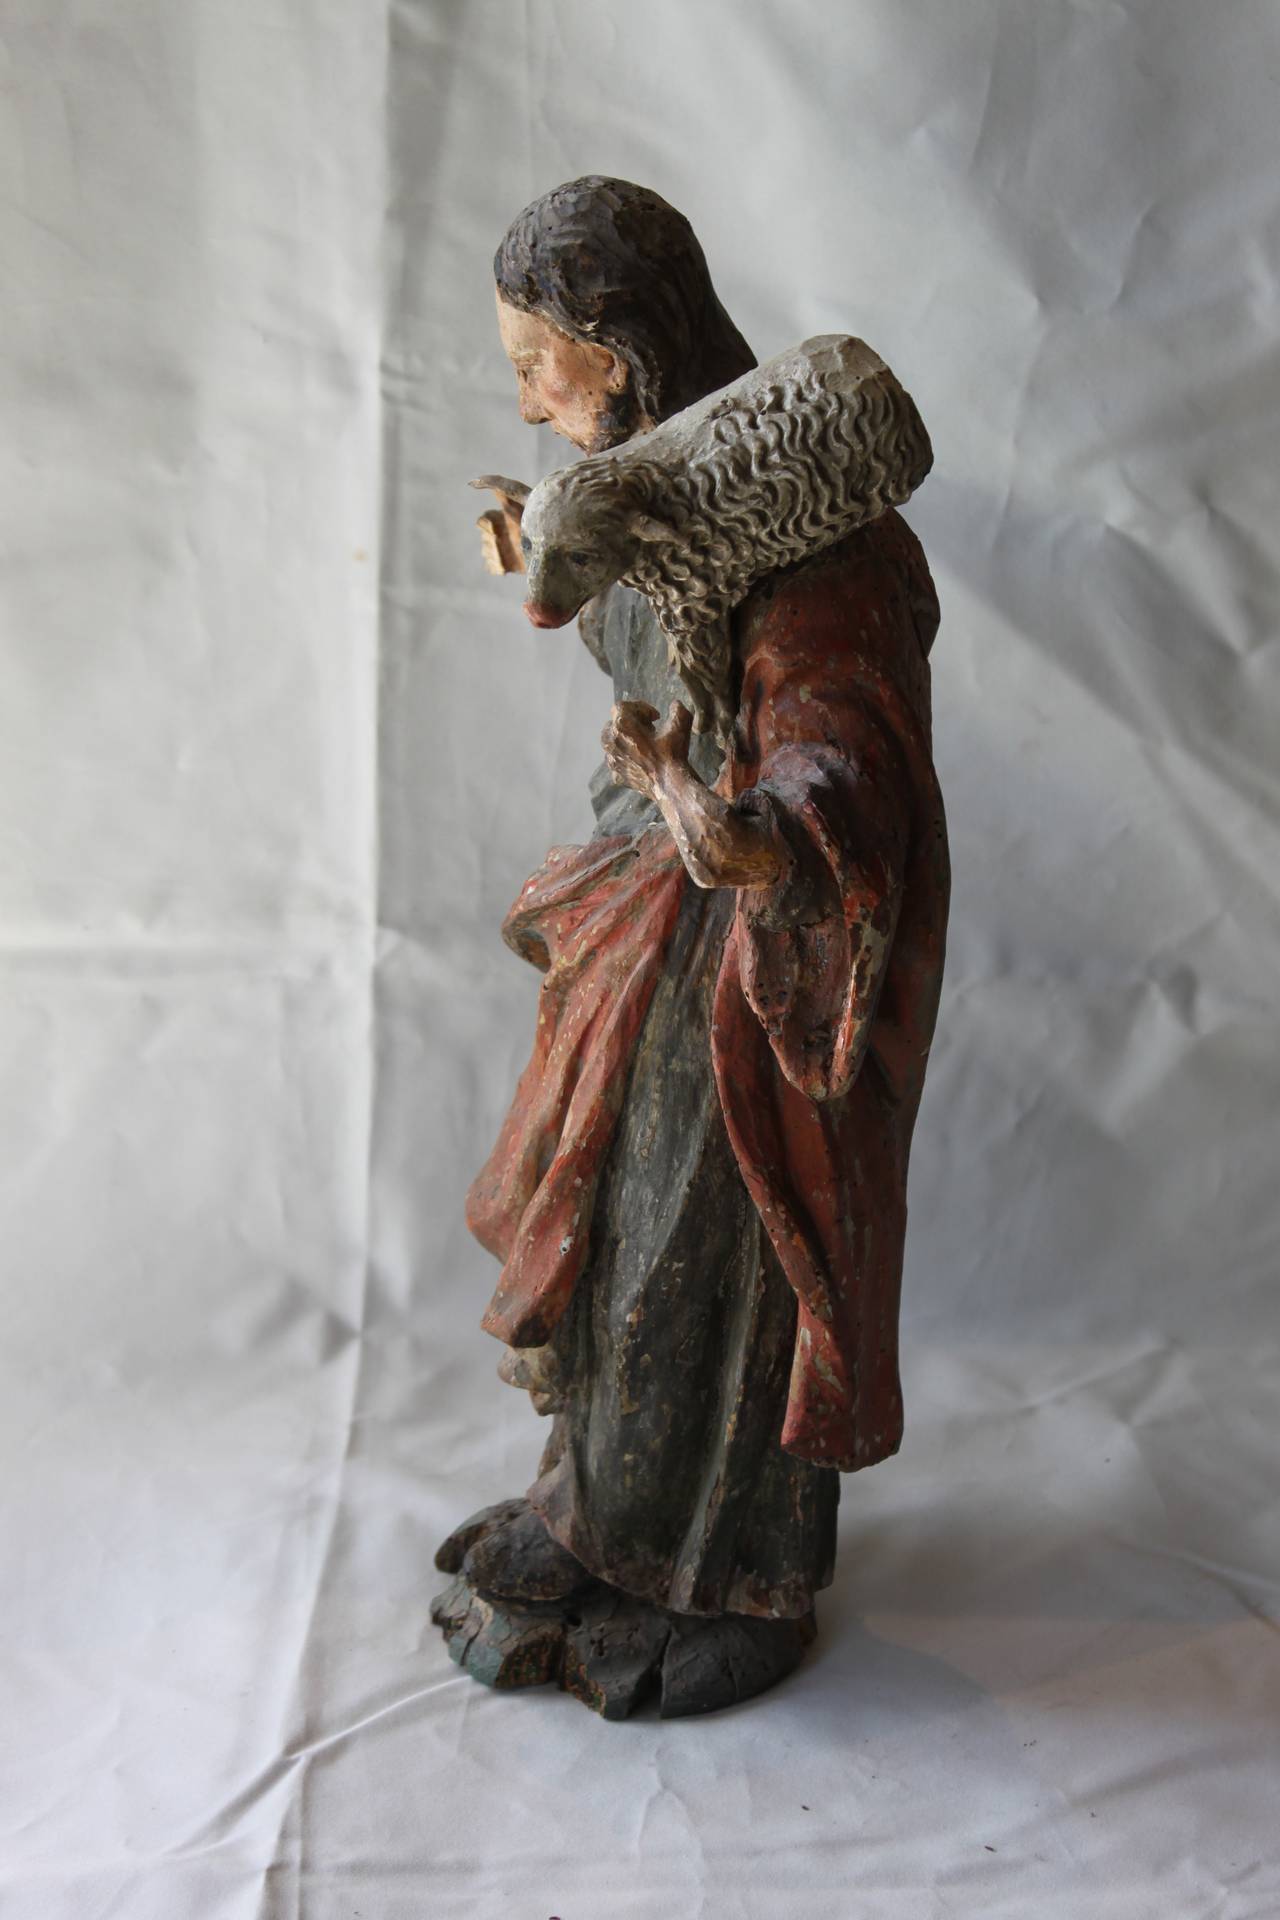 Carved polychrome saint with lamb
Late 18th-19th century
Lamb loose
Missing staff.